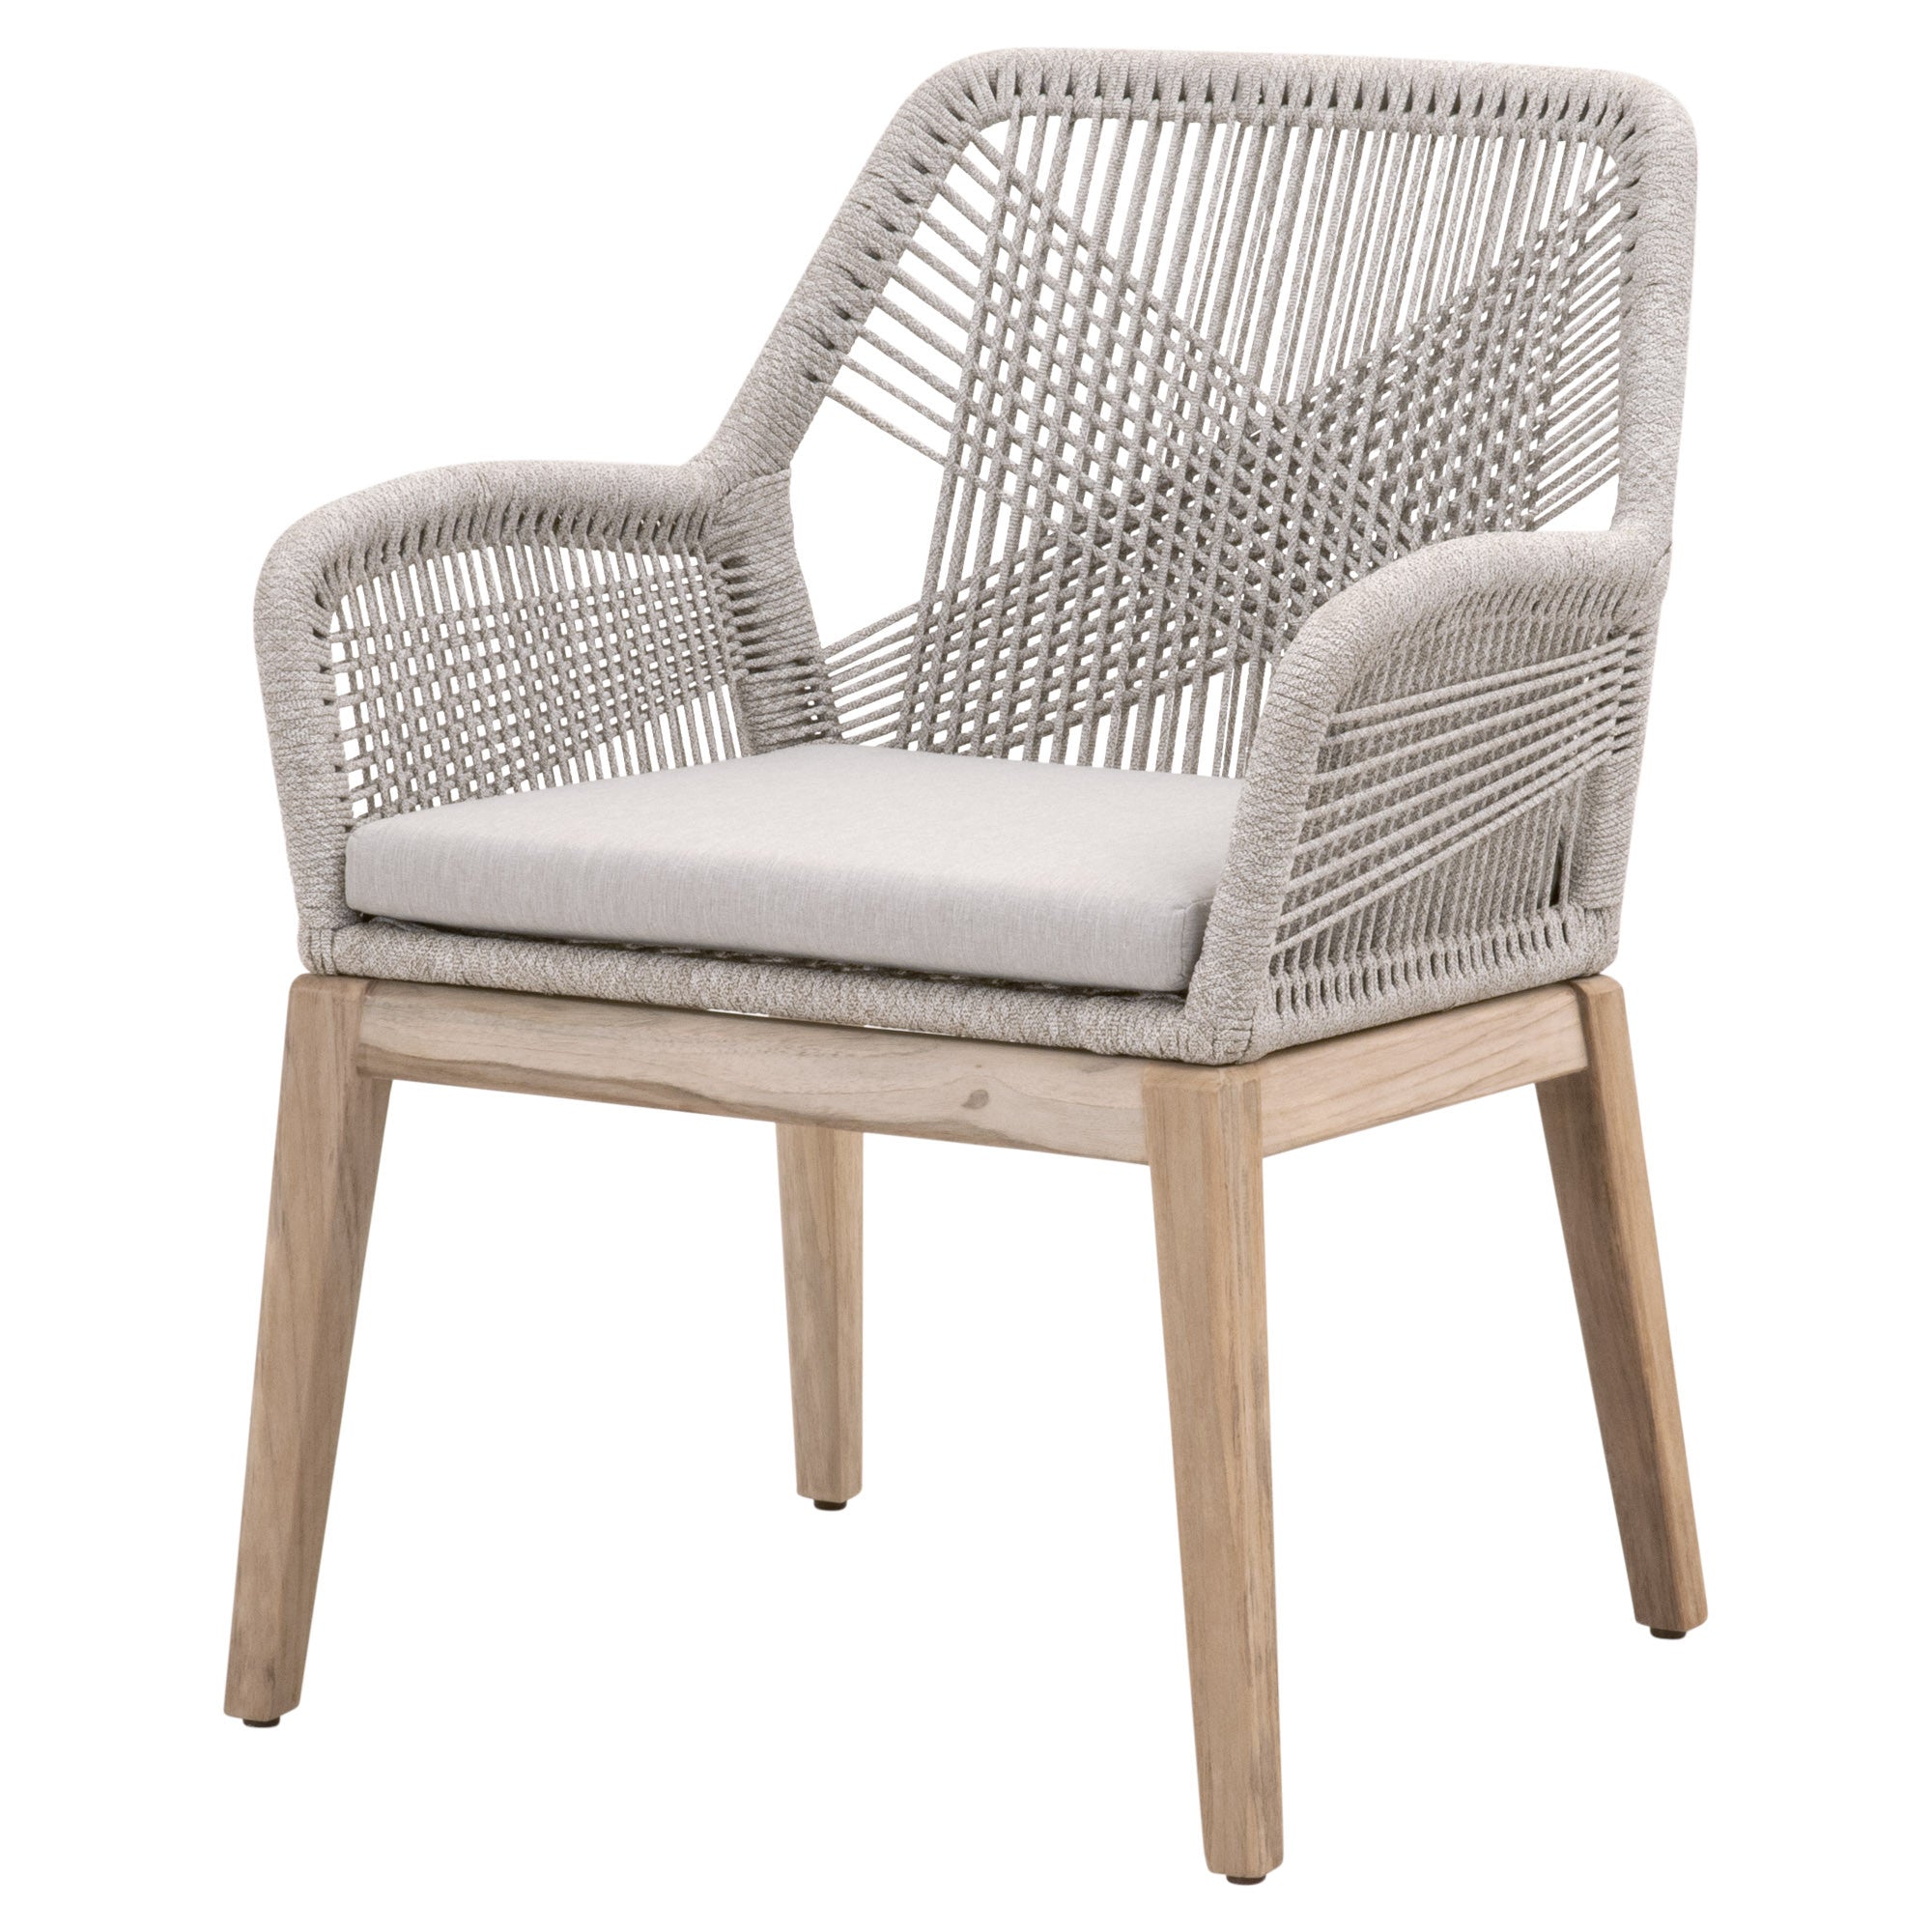 26" Set Of Two Taupe And Natural Solid Wood Dining Chair With Gray Cushion - Tuesday Morning-Outdoor Chairs